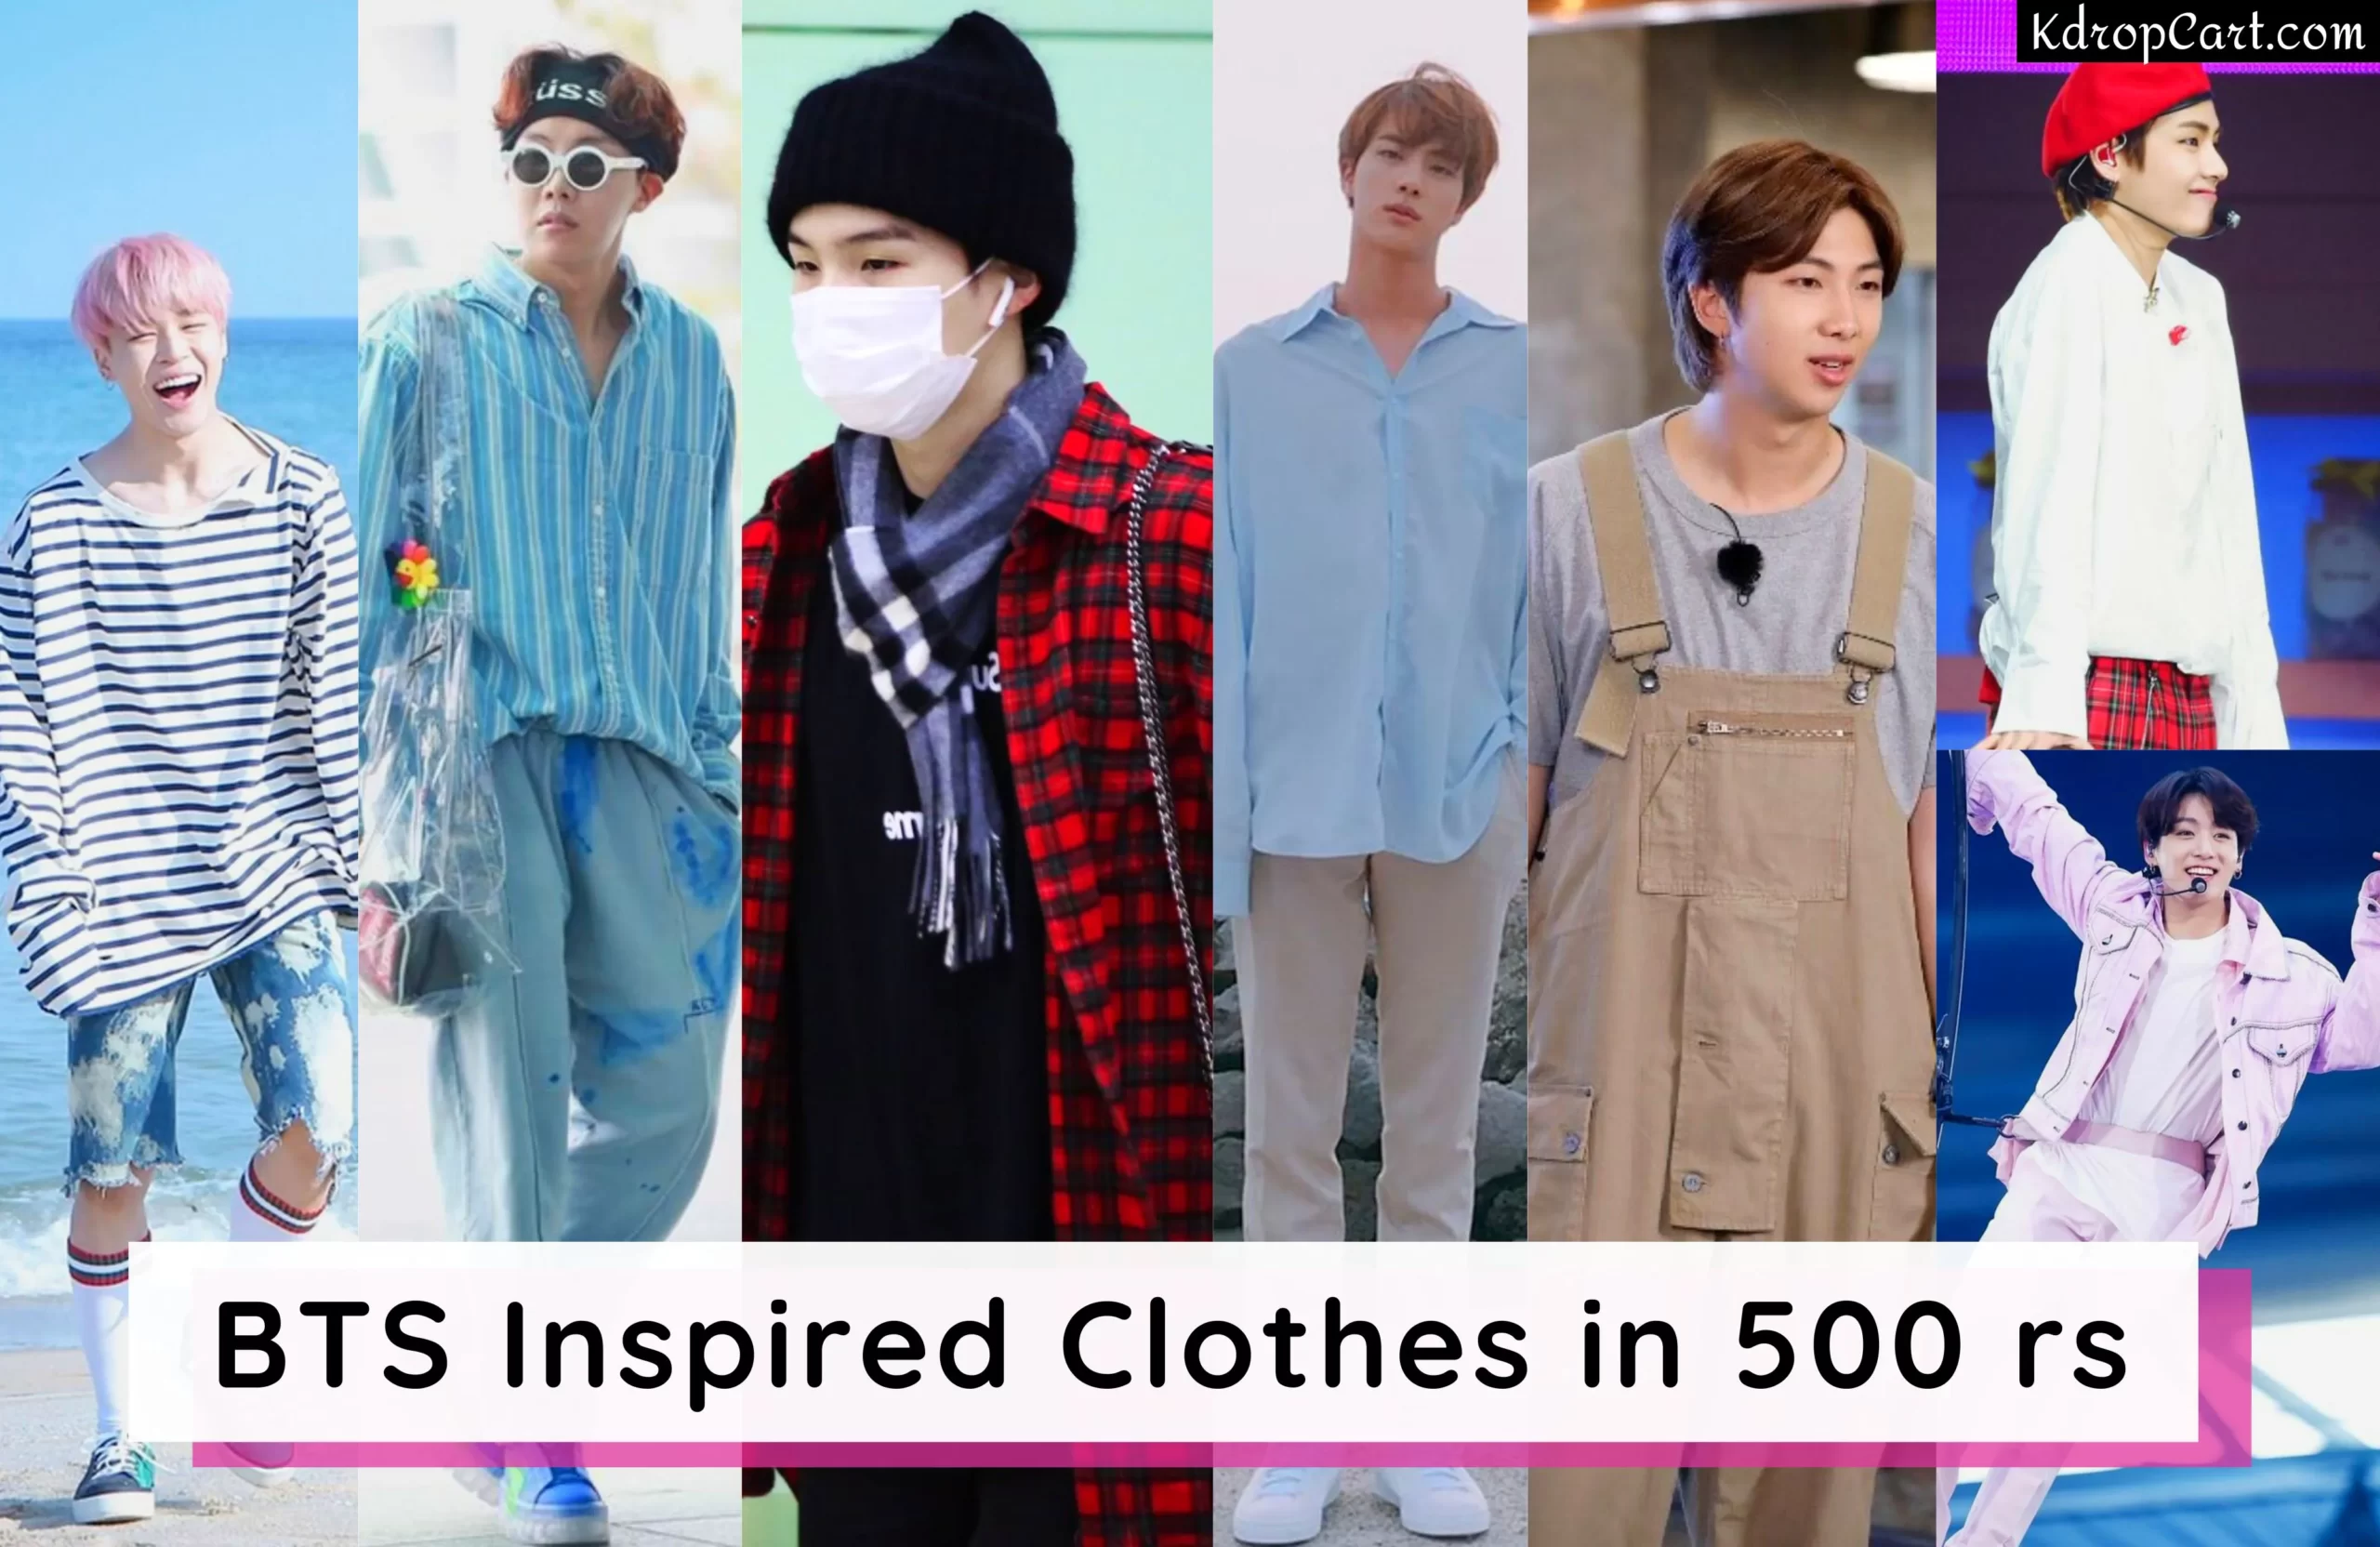 How to dress like BTS in 500 Rs in 2023?, BTS-inspired outfits Ideas under  500 Rs, Dress like BTS in India